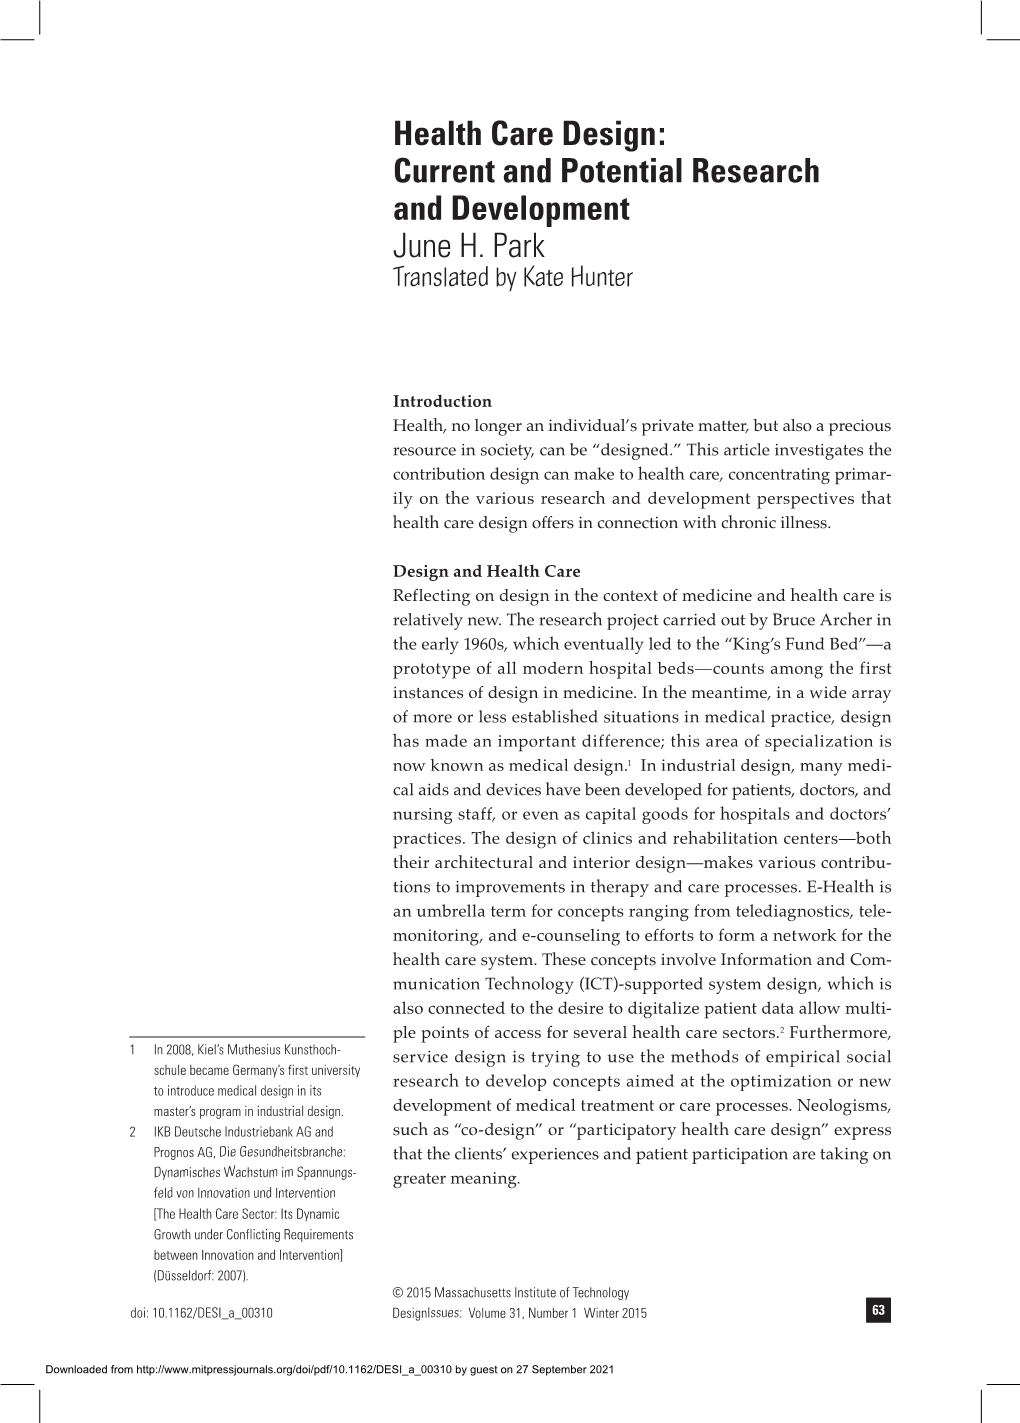 Health Care Design: Current and Potential Research and Development June H